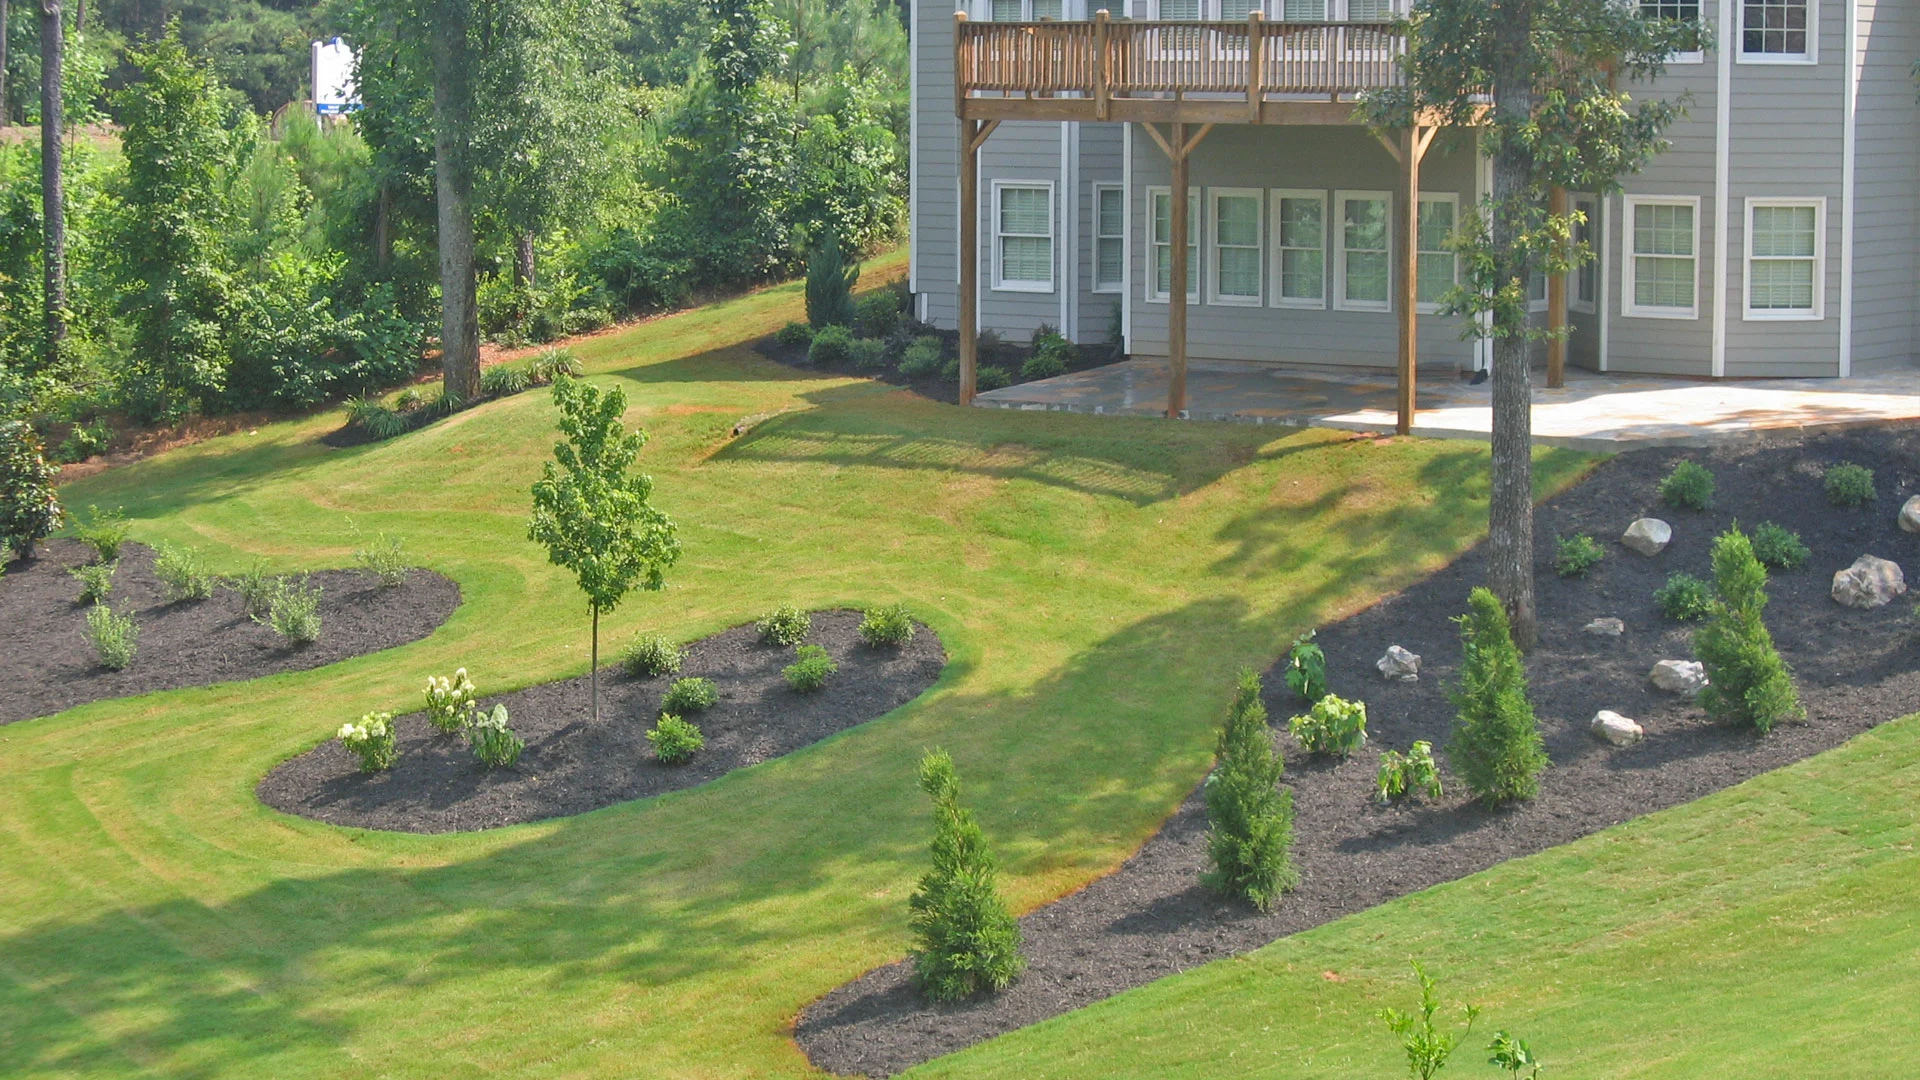 Large back yard with new landscaping beds, plants, and mulch at a home in Buckhead, GA